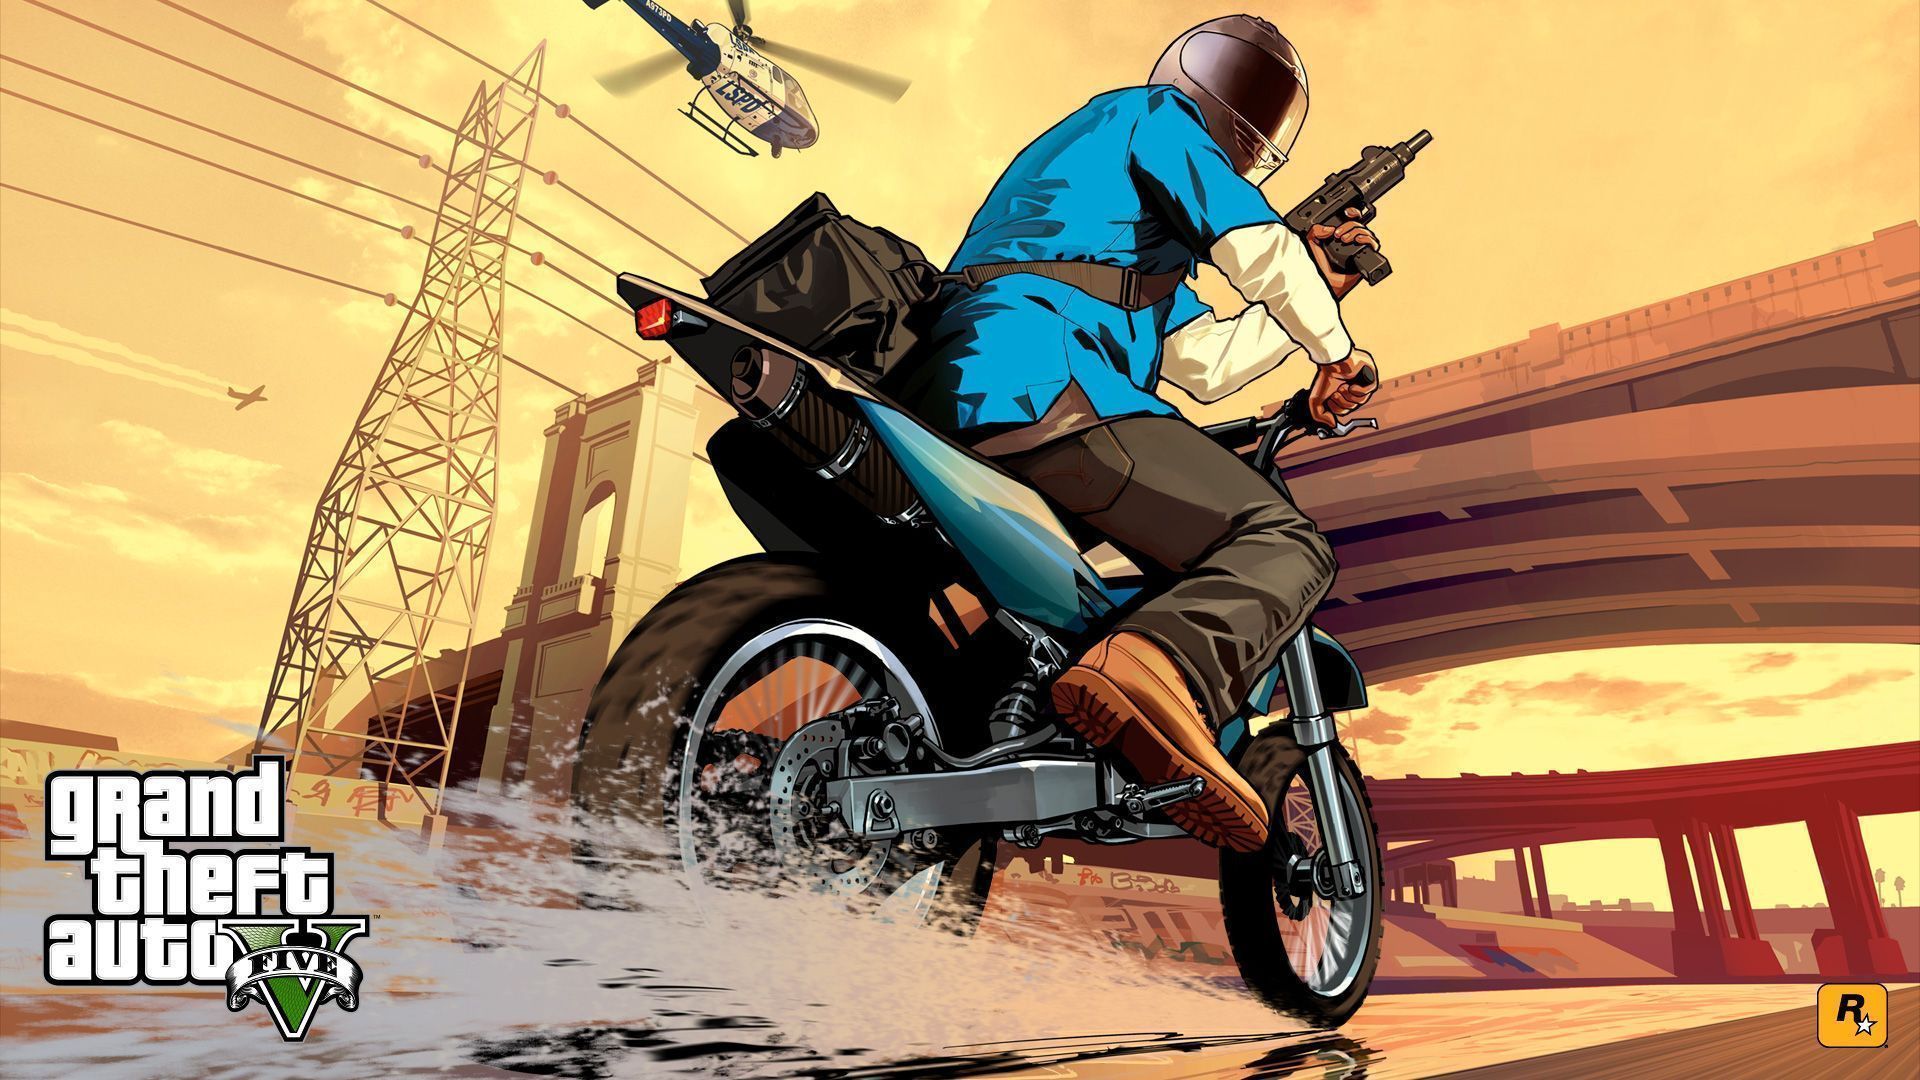 Rockstar Doubles Down on New GTA 5 Backgrounds